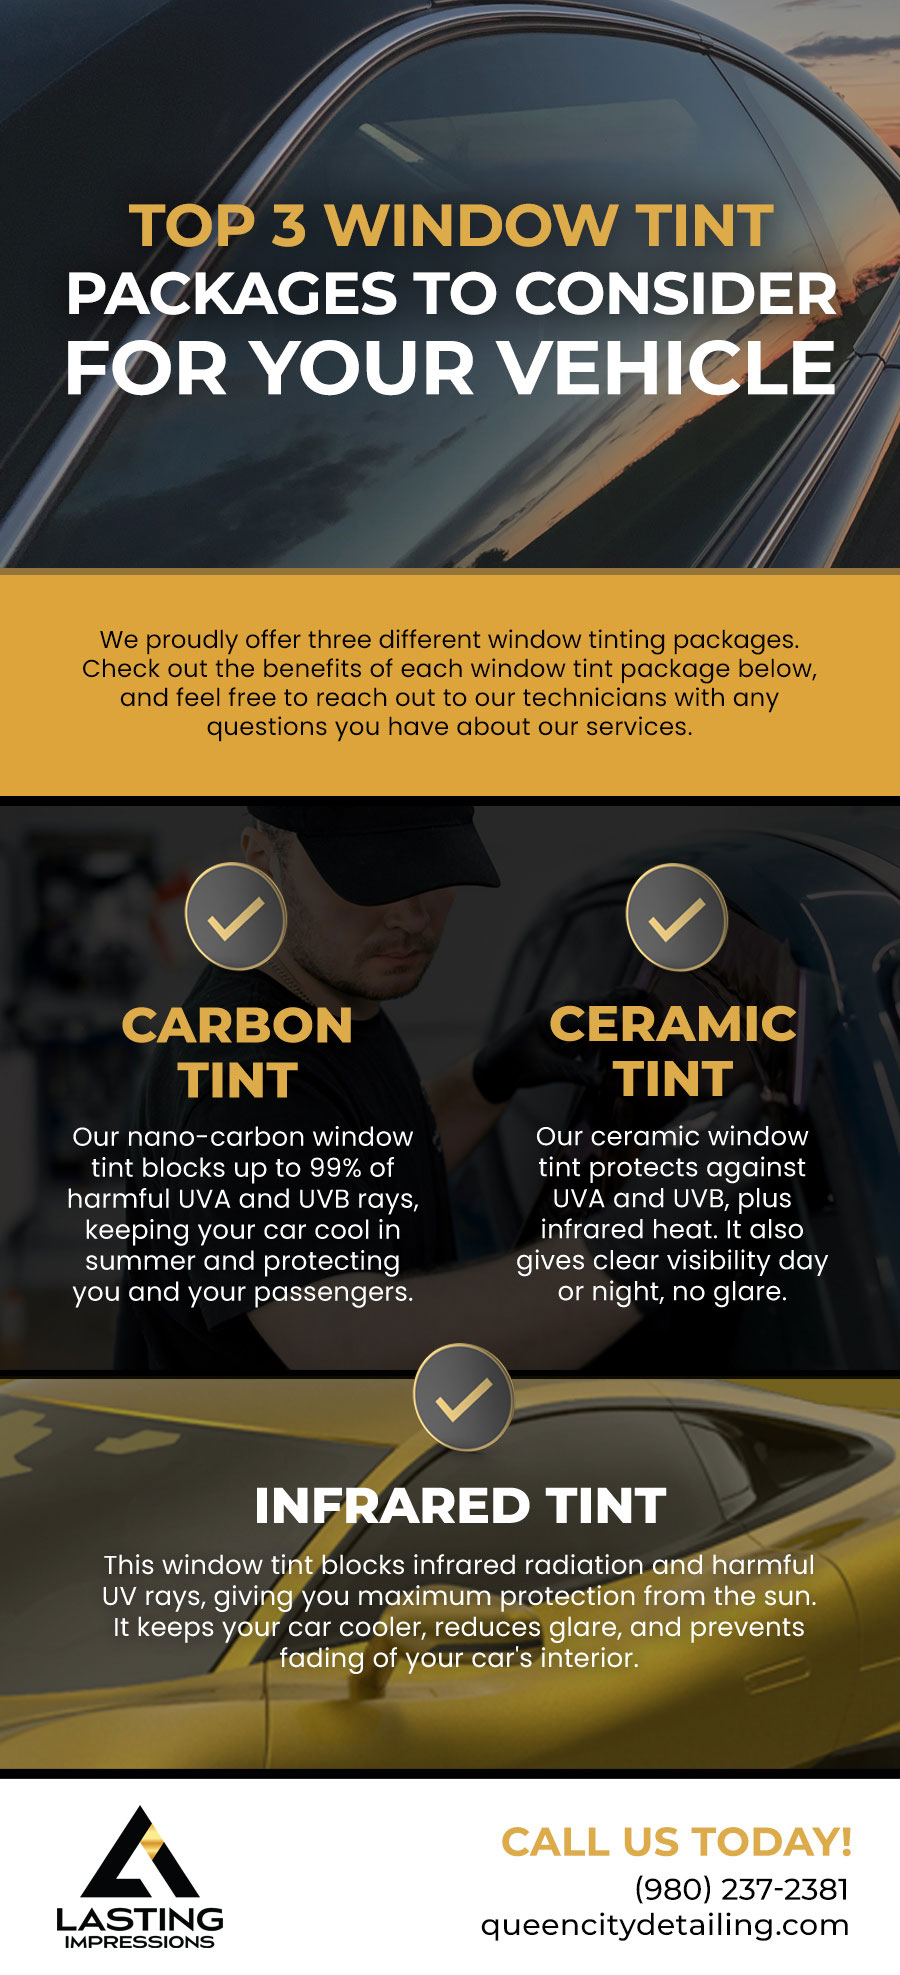 Top Three Window Tint Packages to Consider for Your Vehicle